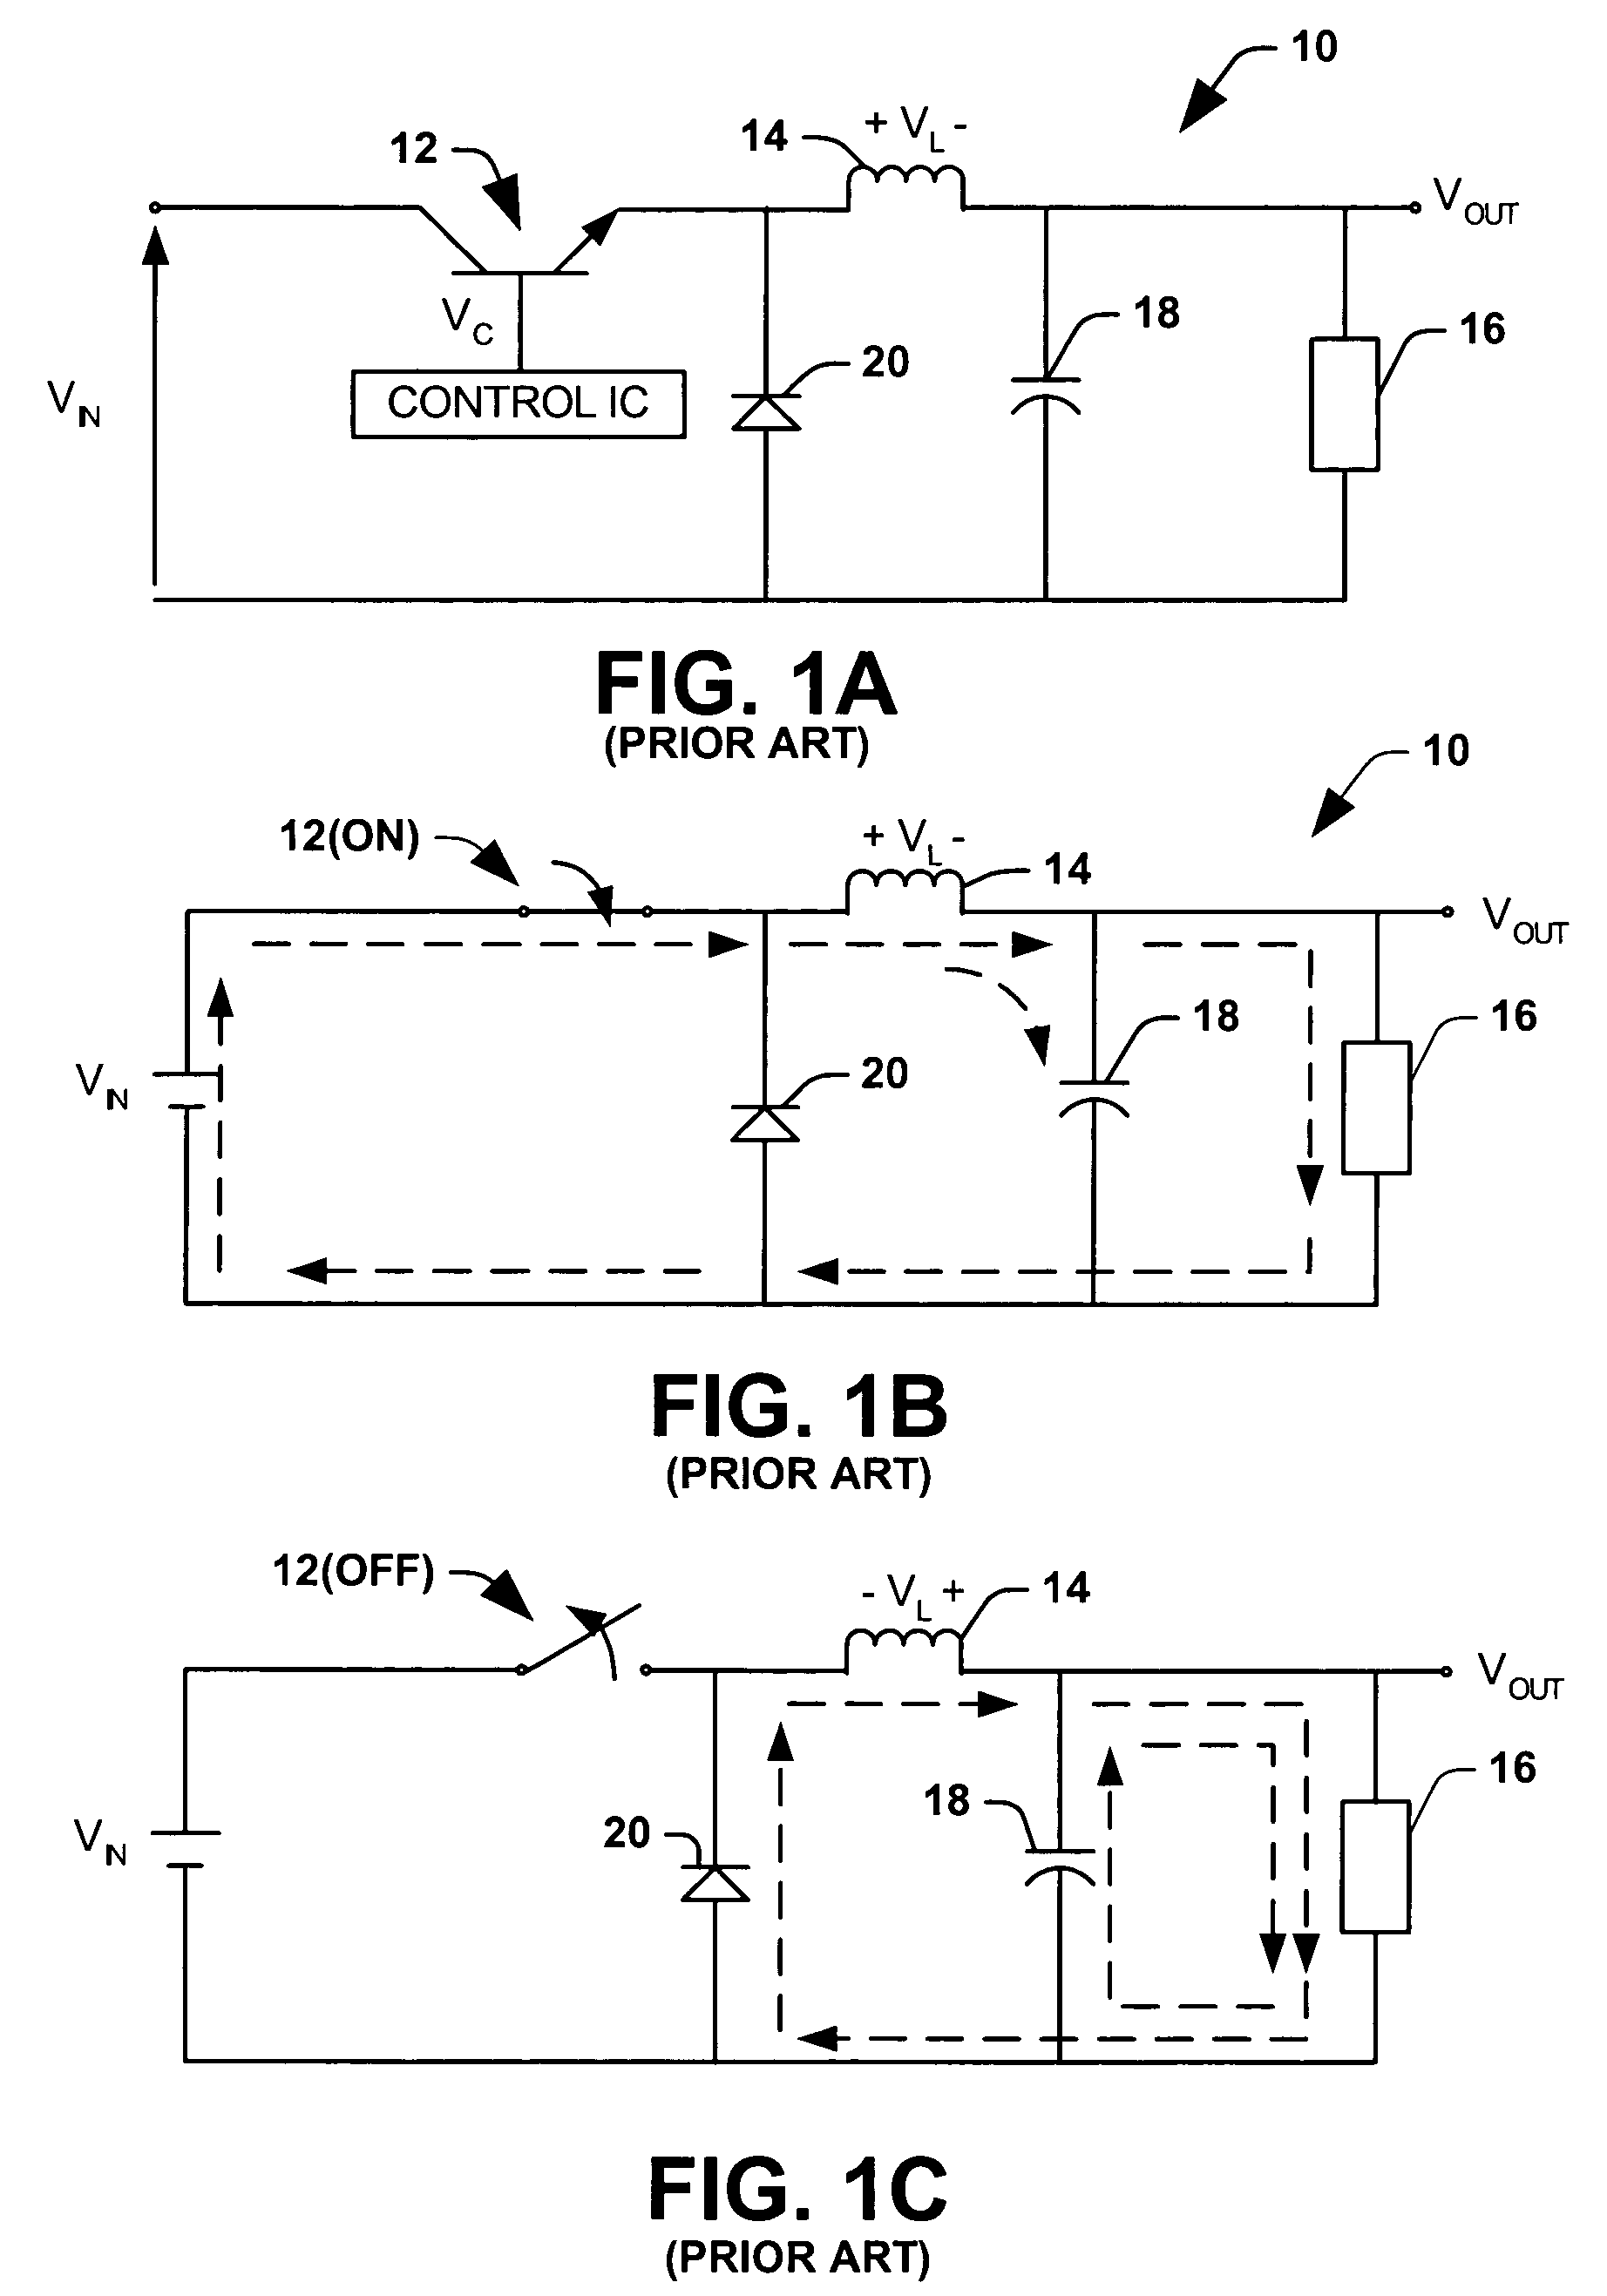 Single inductor dual output buck converter with frequency and time varying offset control